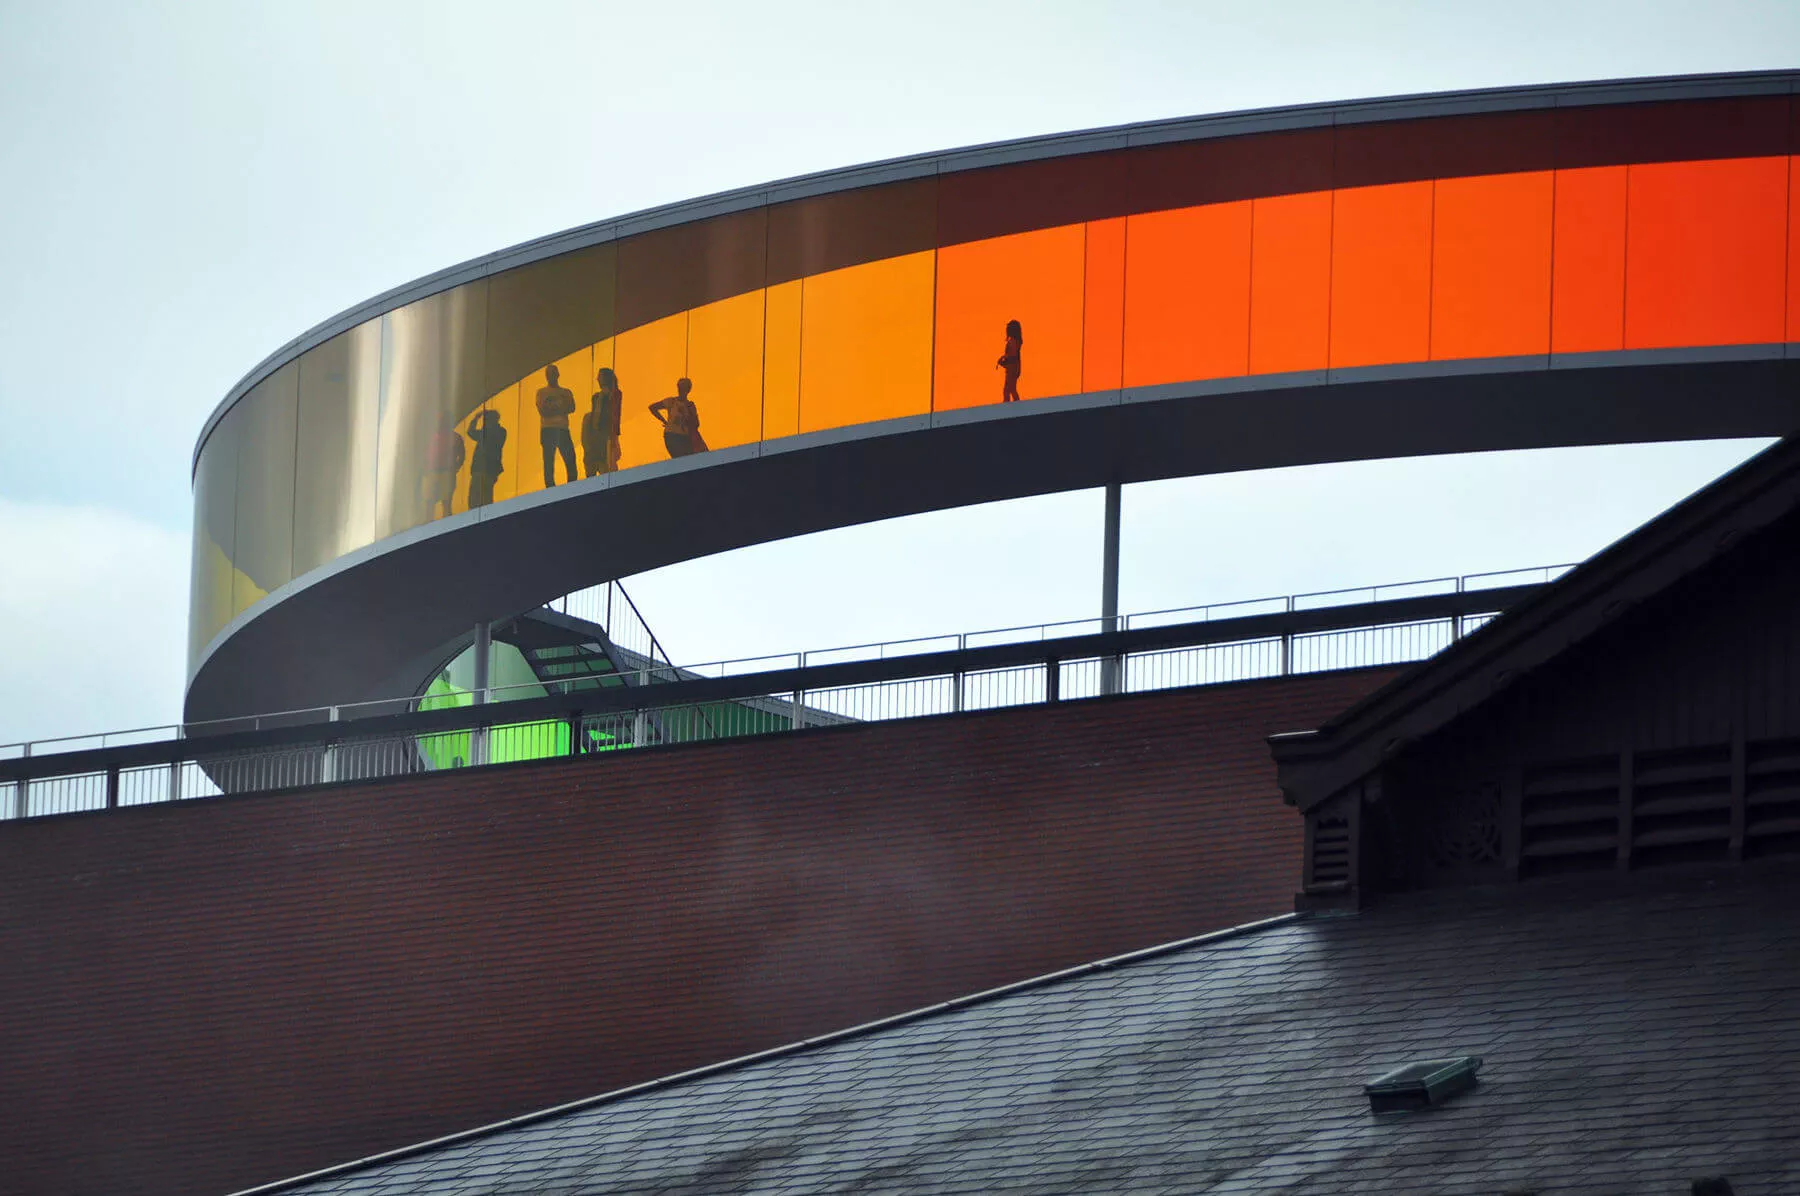 The "Rainbow Panorama" atop the Aarhus art museum is experiential art at its best